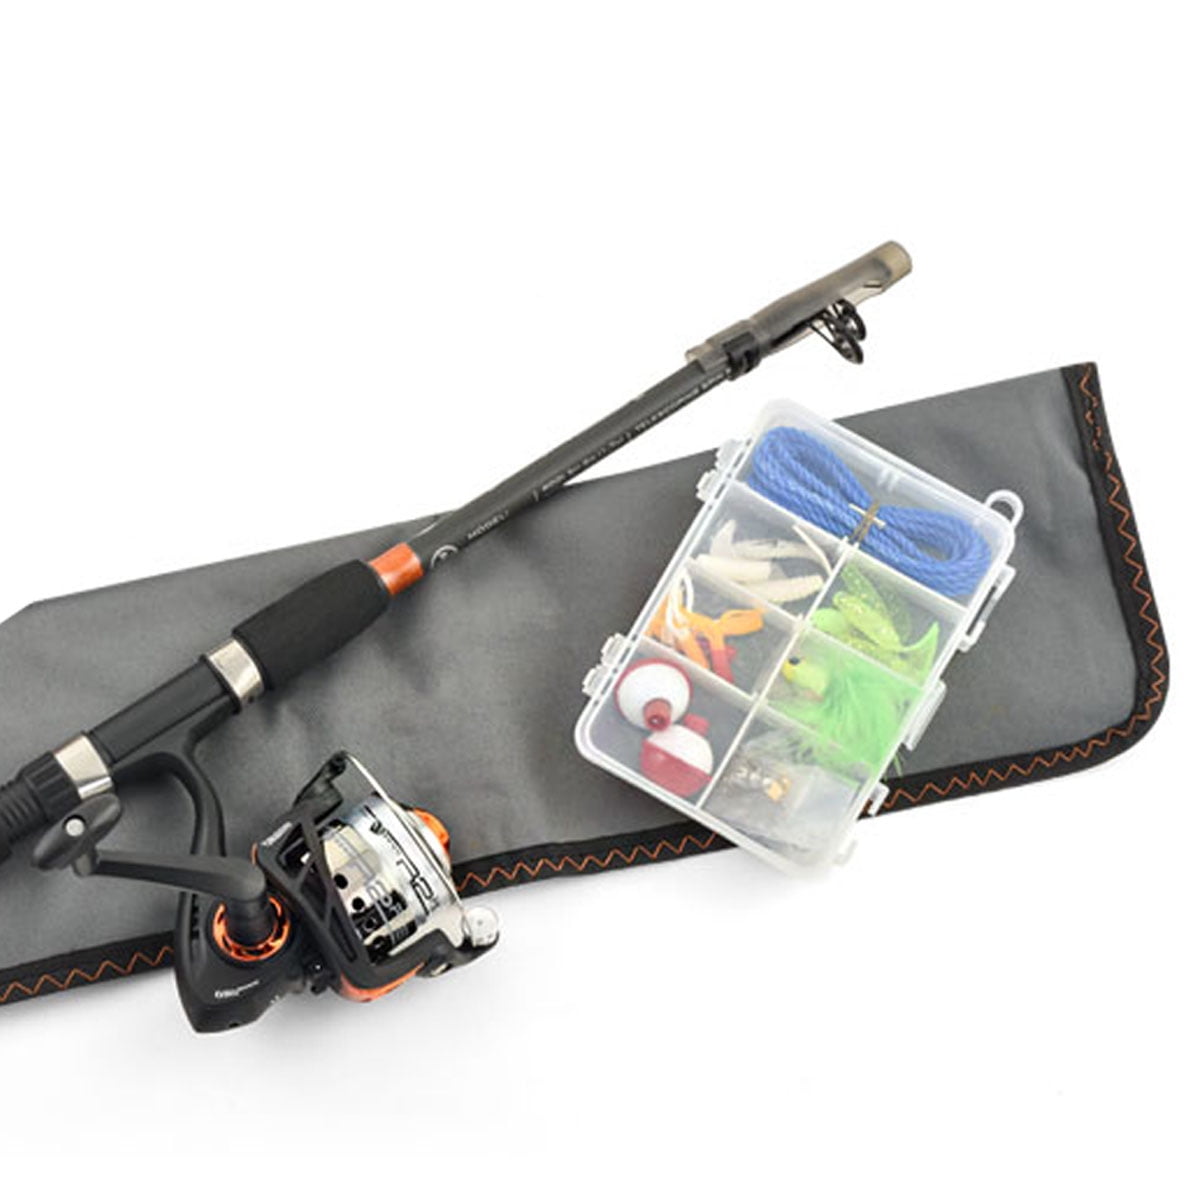 South Bend R2F Telescopic Spinning Fishing Rod & Reel Combo w/ Tackle Kit,  5'6 